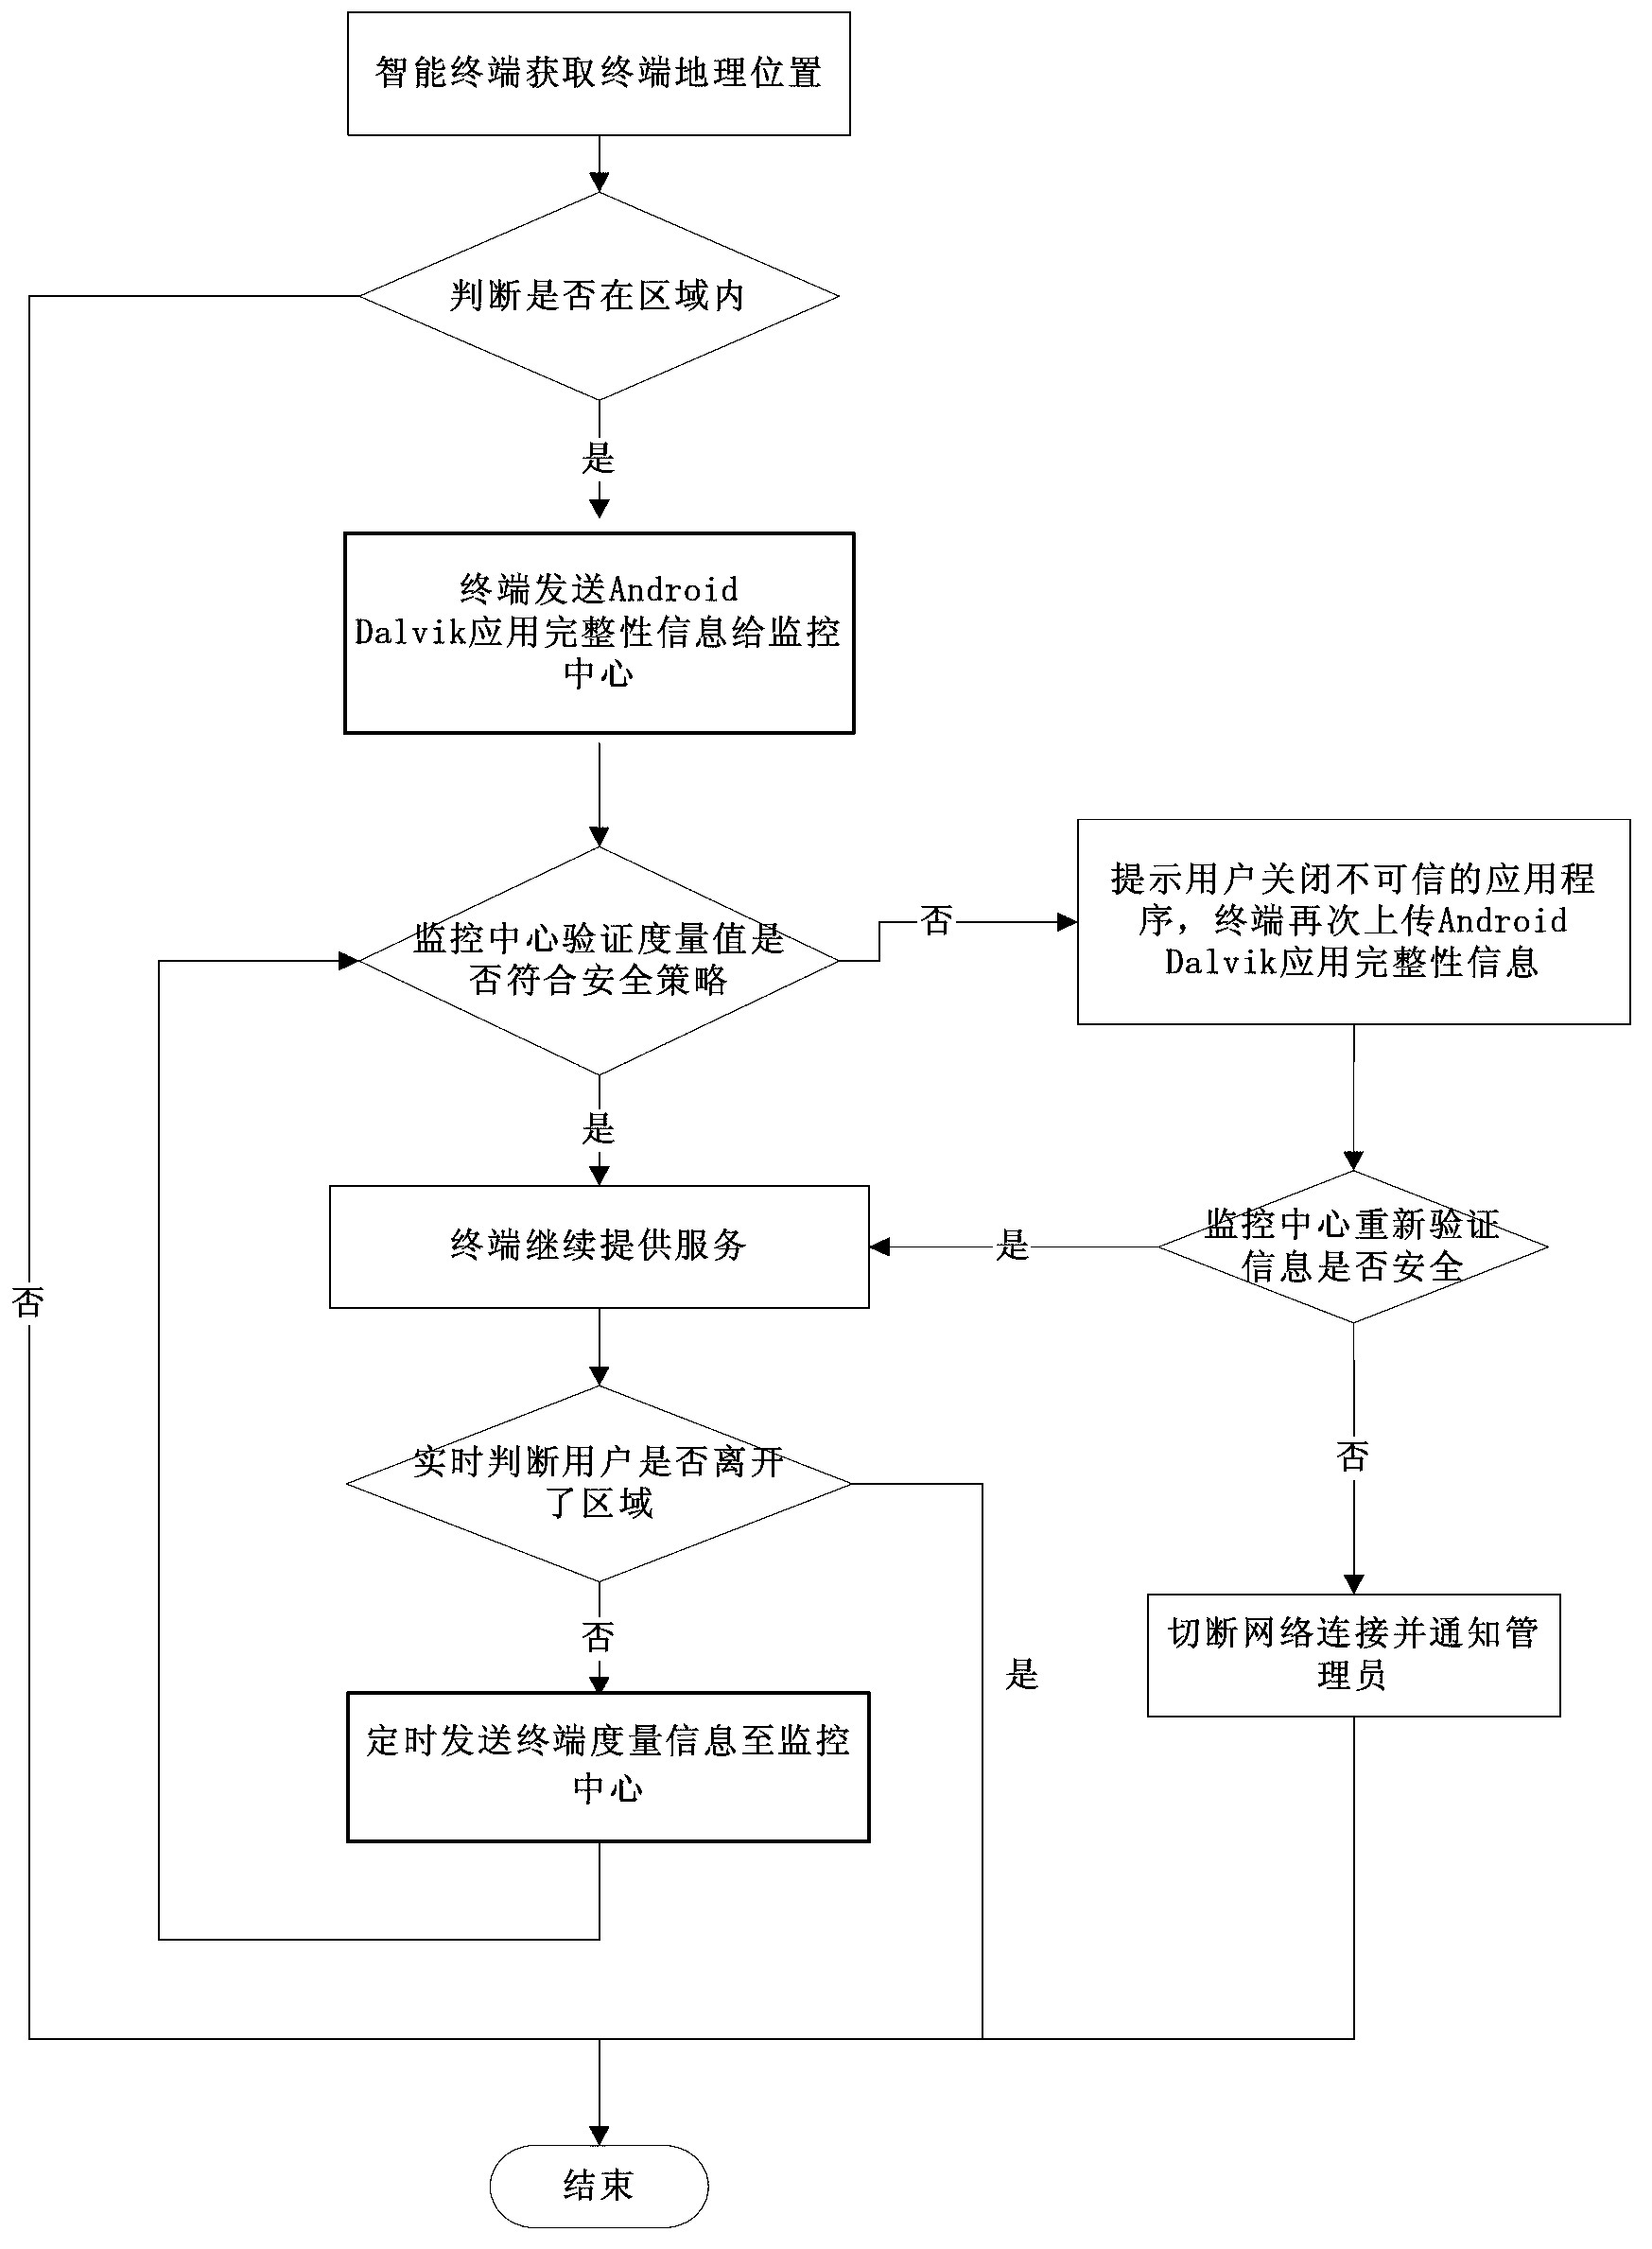 Method and system for trusted control of operating environment of Android intelligent terminal